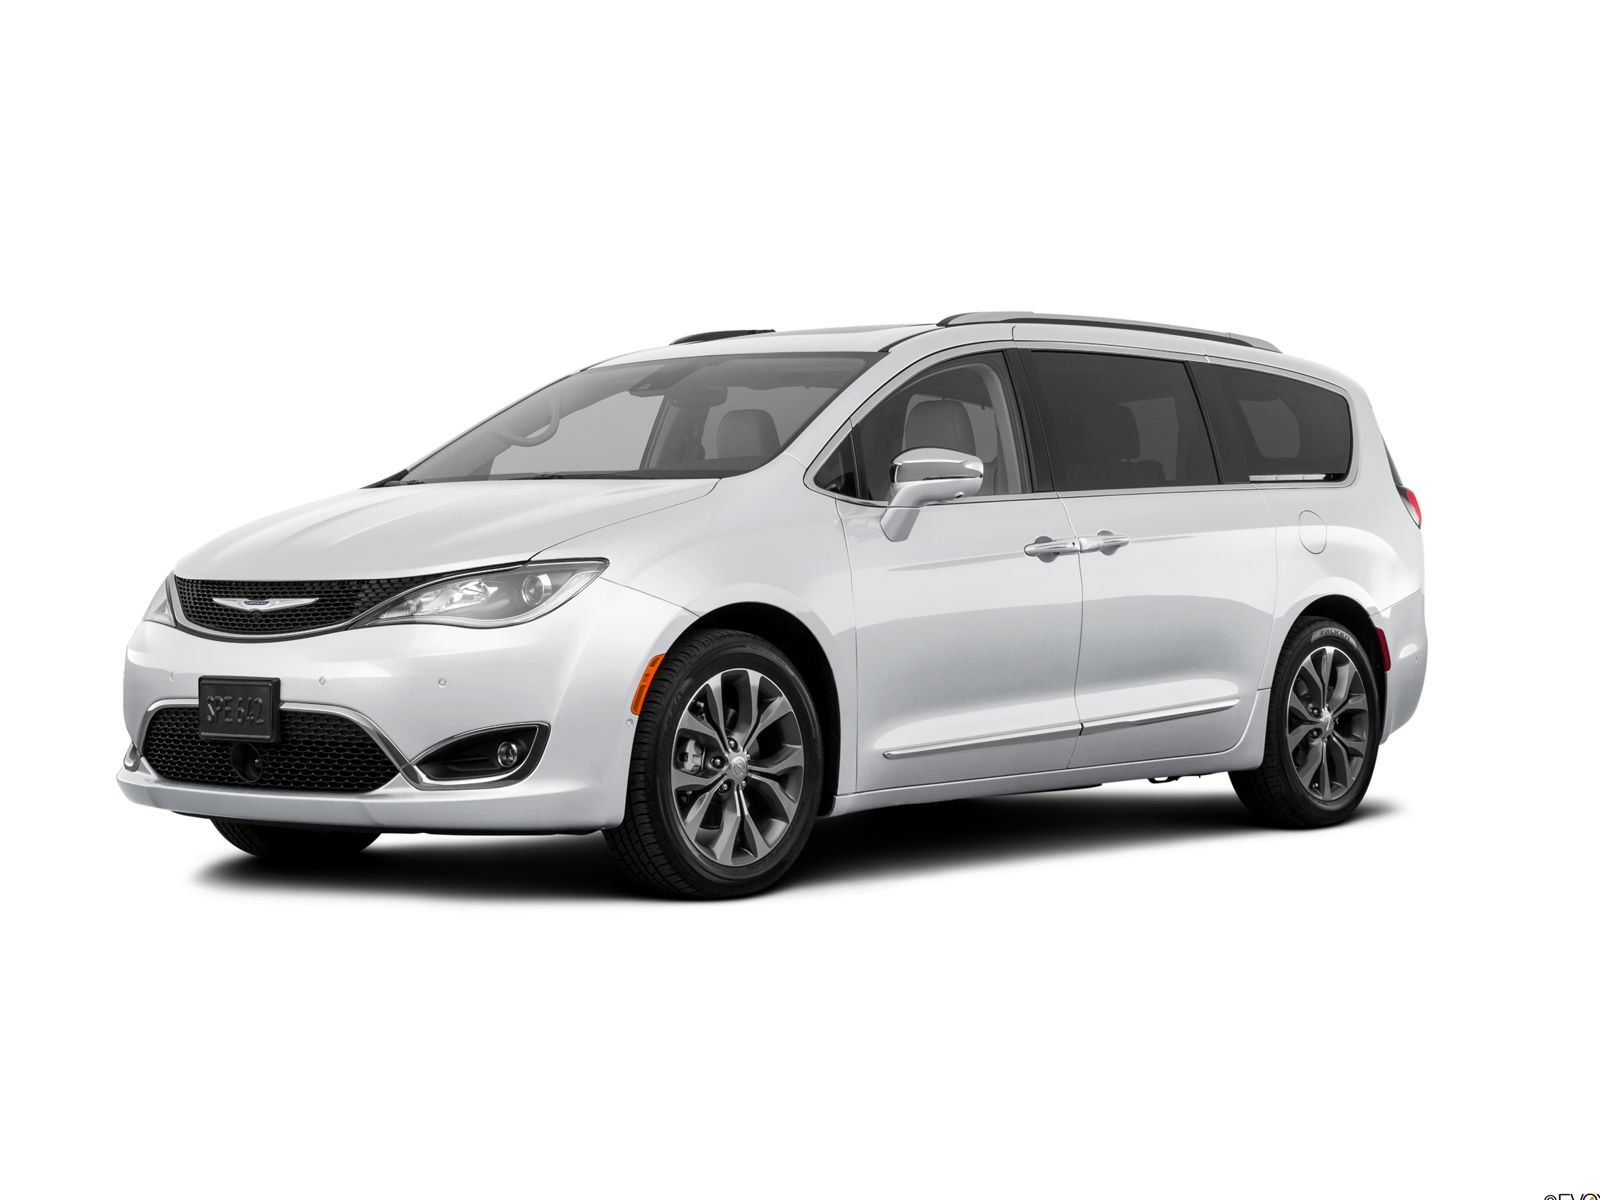 2019 Chrysler Pacifica Research, photos, specs and expertise | CarMax